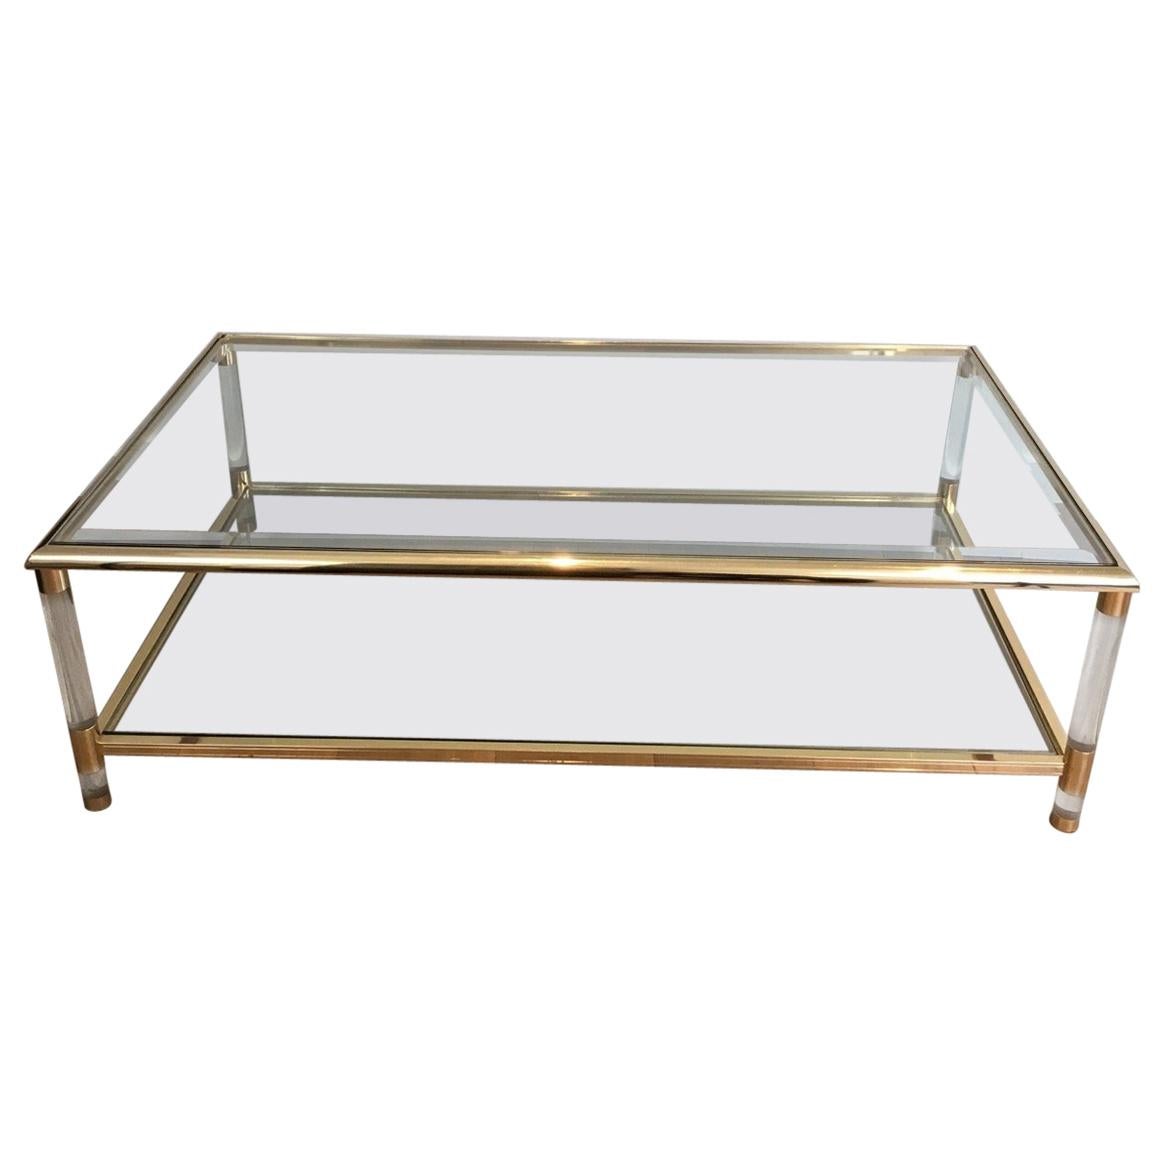 Large Gild on Nickel and Lucite Coffee Table, French, circa 1970